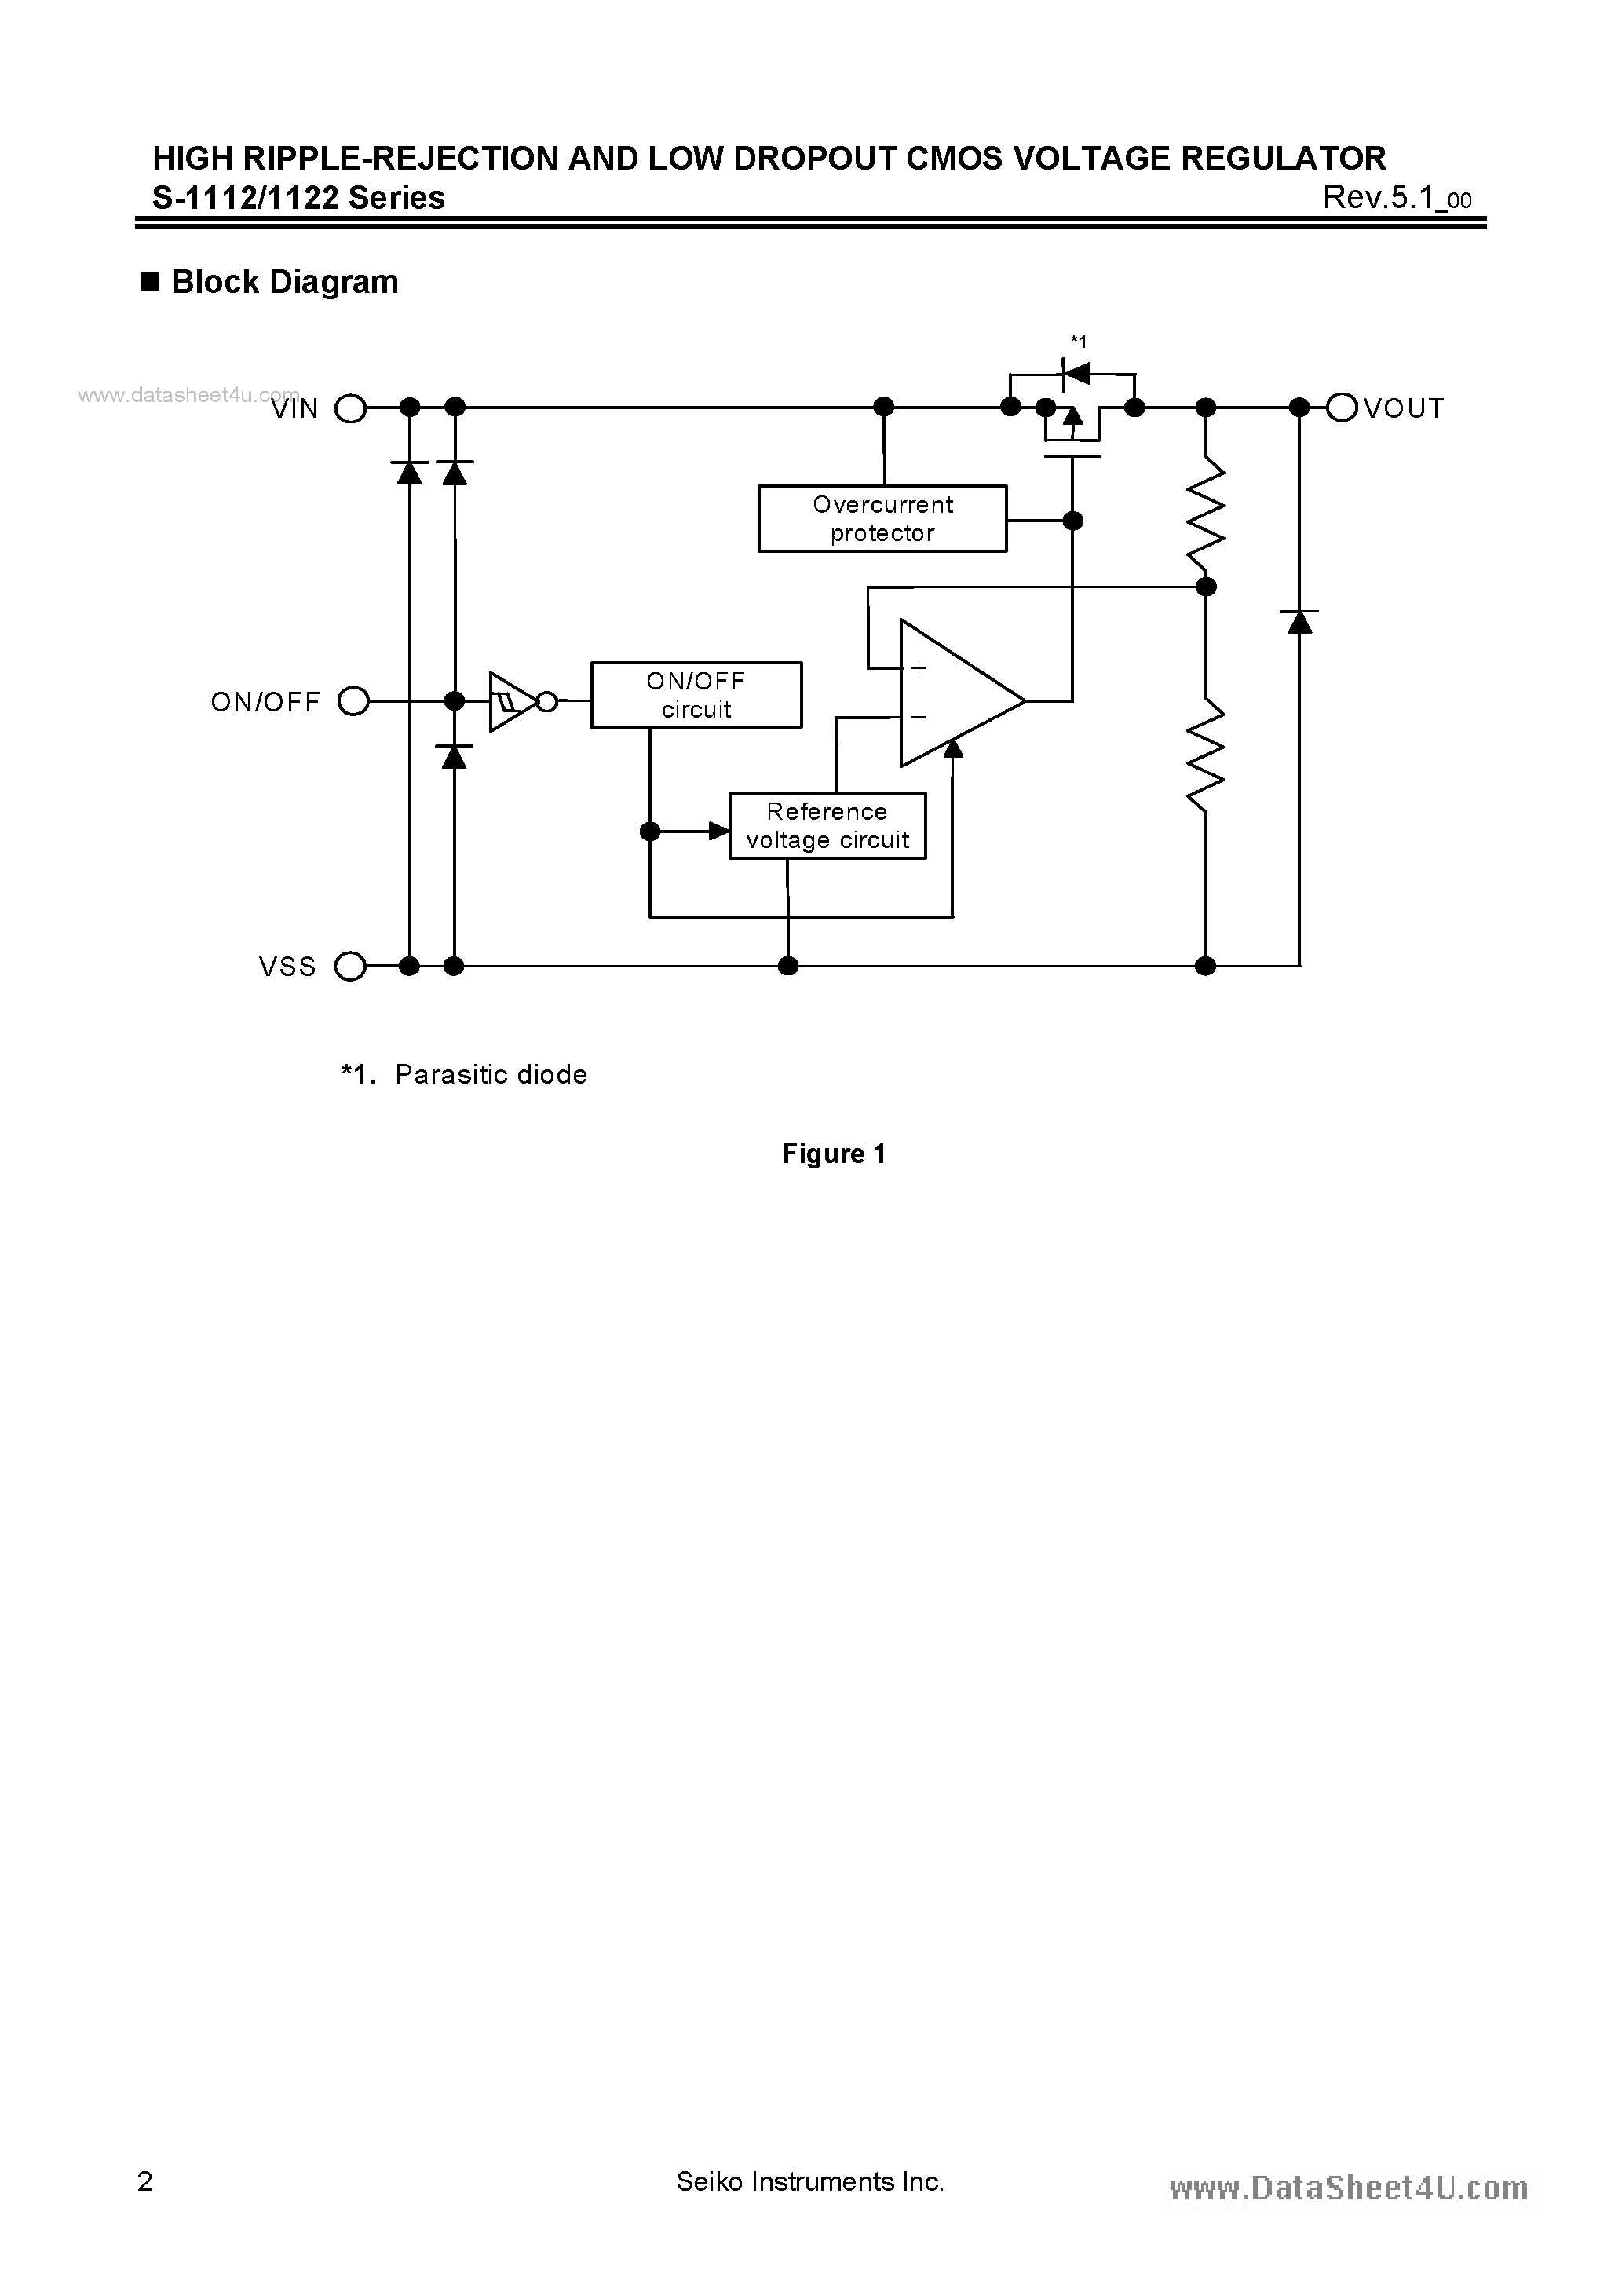 Datasheet S-1112 - 9S-1112 / S-1122) HIGH RIPPLE-REJECTION AND LOW DROPOUT CMOS VOLTAGE REGULATOR page 2